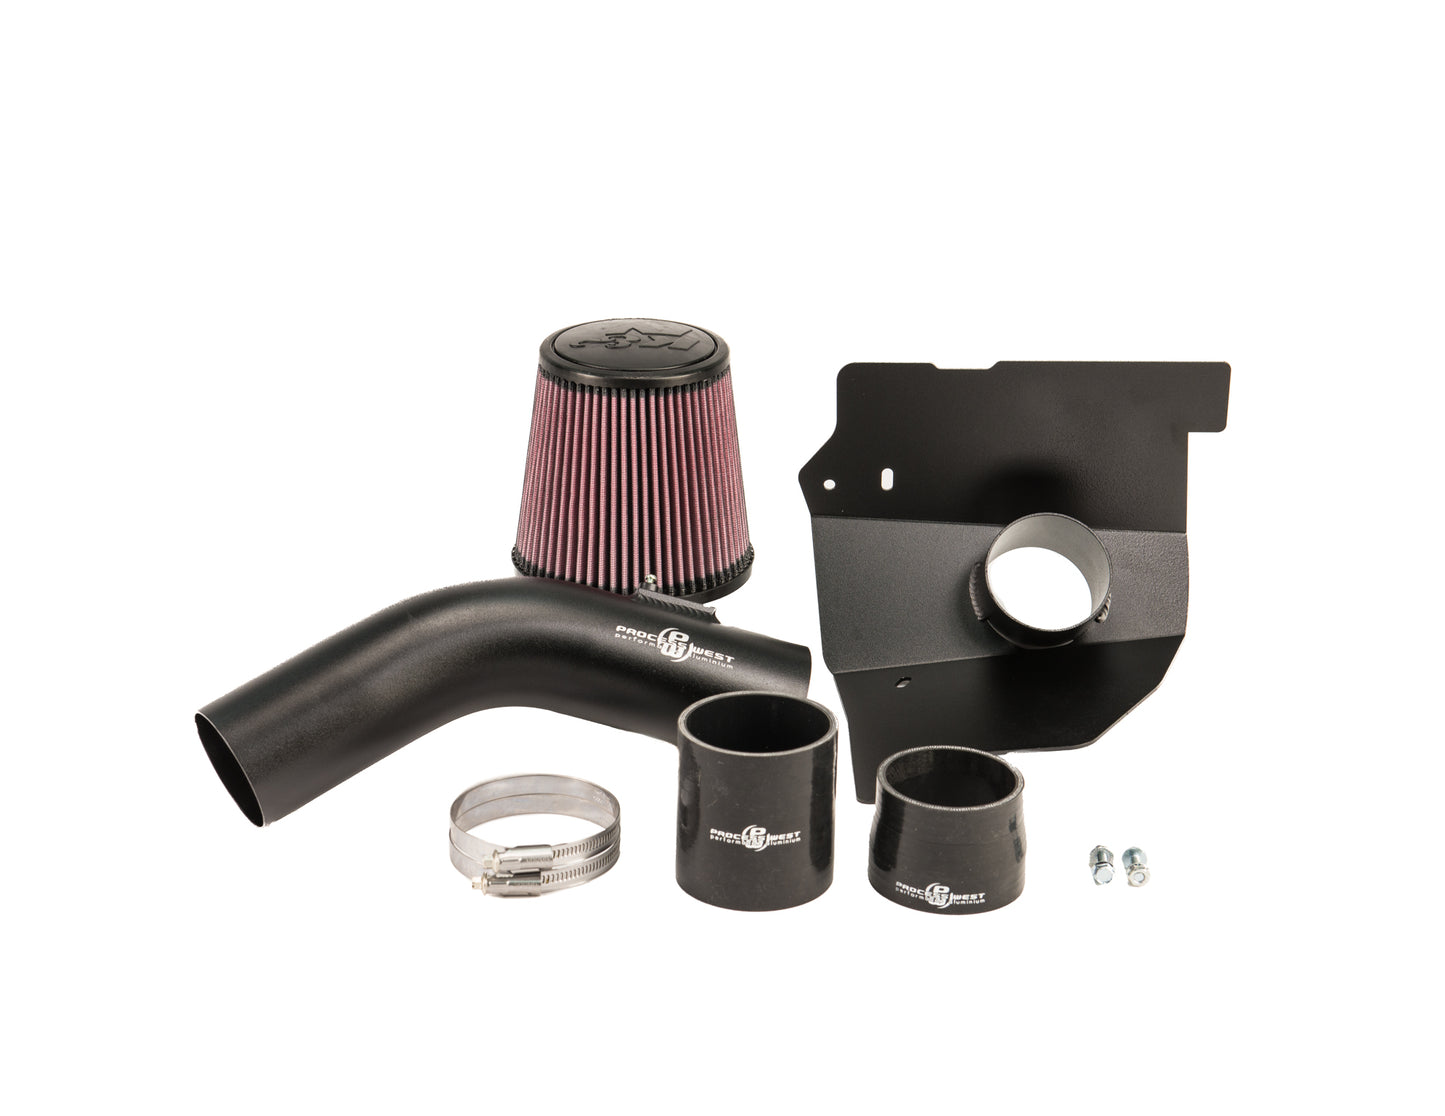 Process West - Cold Air Intake 72mm (CAI) - (Forester SH XT 08-13)